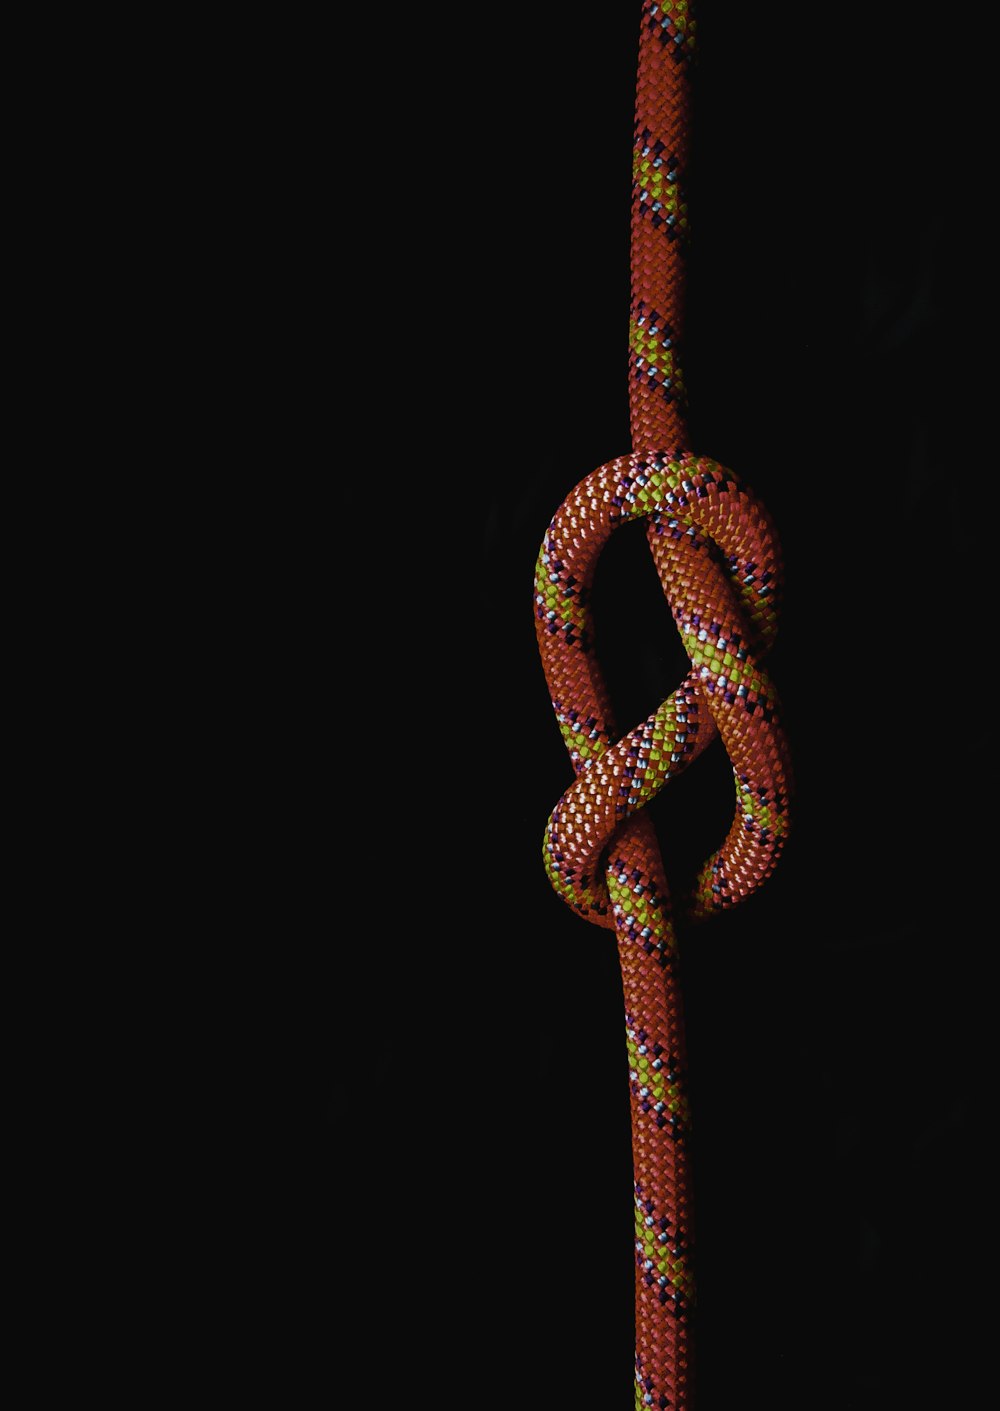 white and red rope on black background